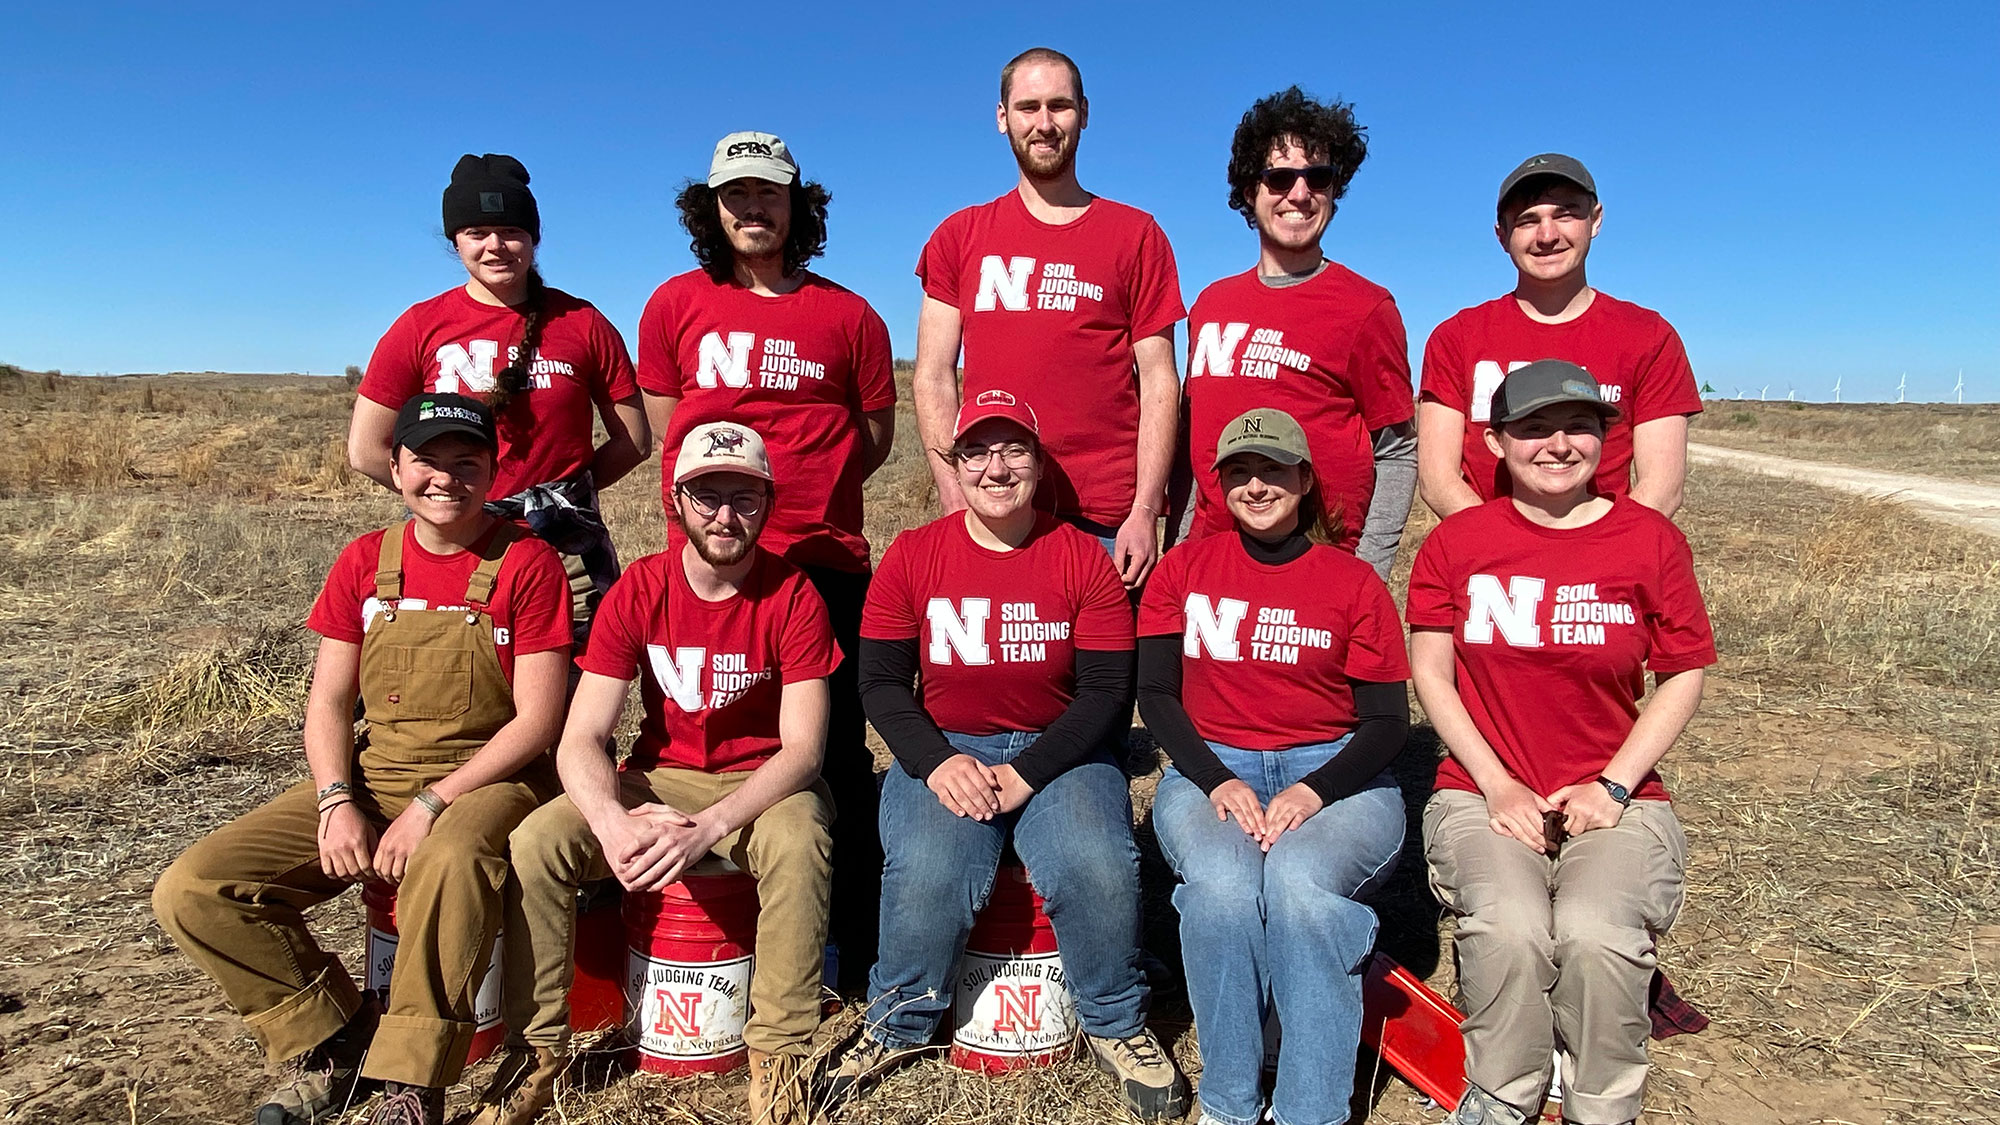 The University of Nebraska–Lincoln Soil Judging Team places fourth overall at the National Collegiate Soil Judging Contest hosted by Oklahoma State University on March 31 near Woodward, Oklahoma. Team members are Stephanie Kluthe, (back row, from left) Sean Glasshoff, Mason Rutgers, Johnathan Kelly, Jack Krebs, Will Hernandez (front row, from left), Mason Schumacher, Charlotte Brockman, Julianna Cañedo and Rachel Clarkson.